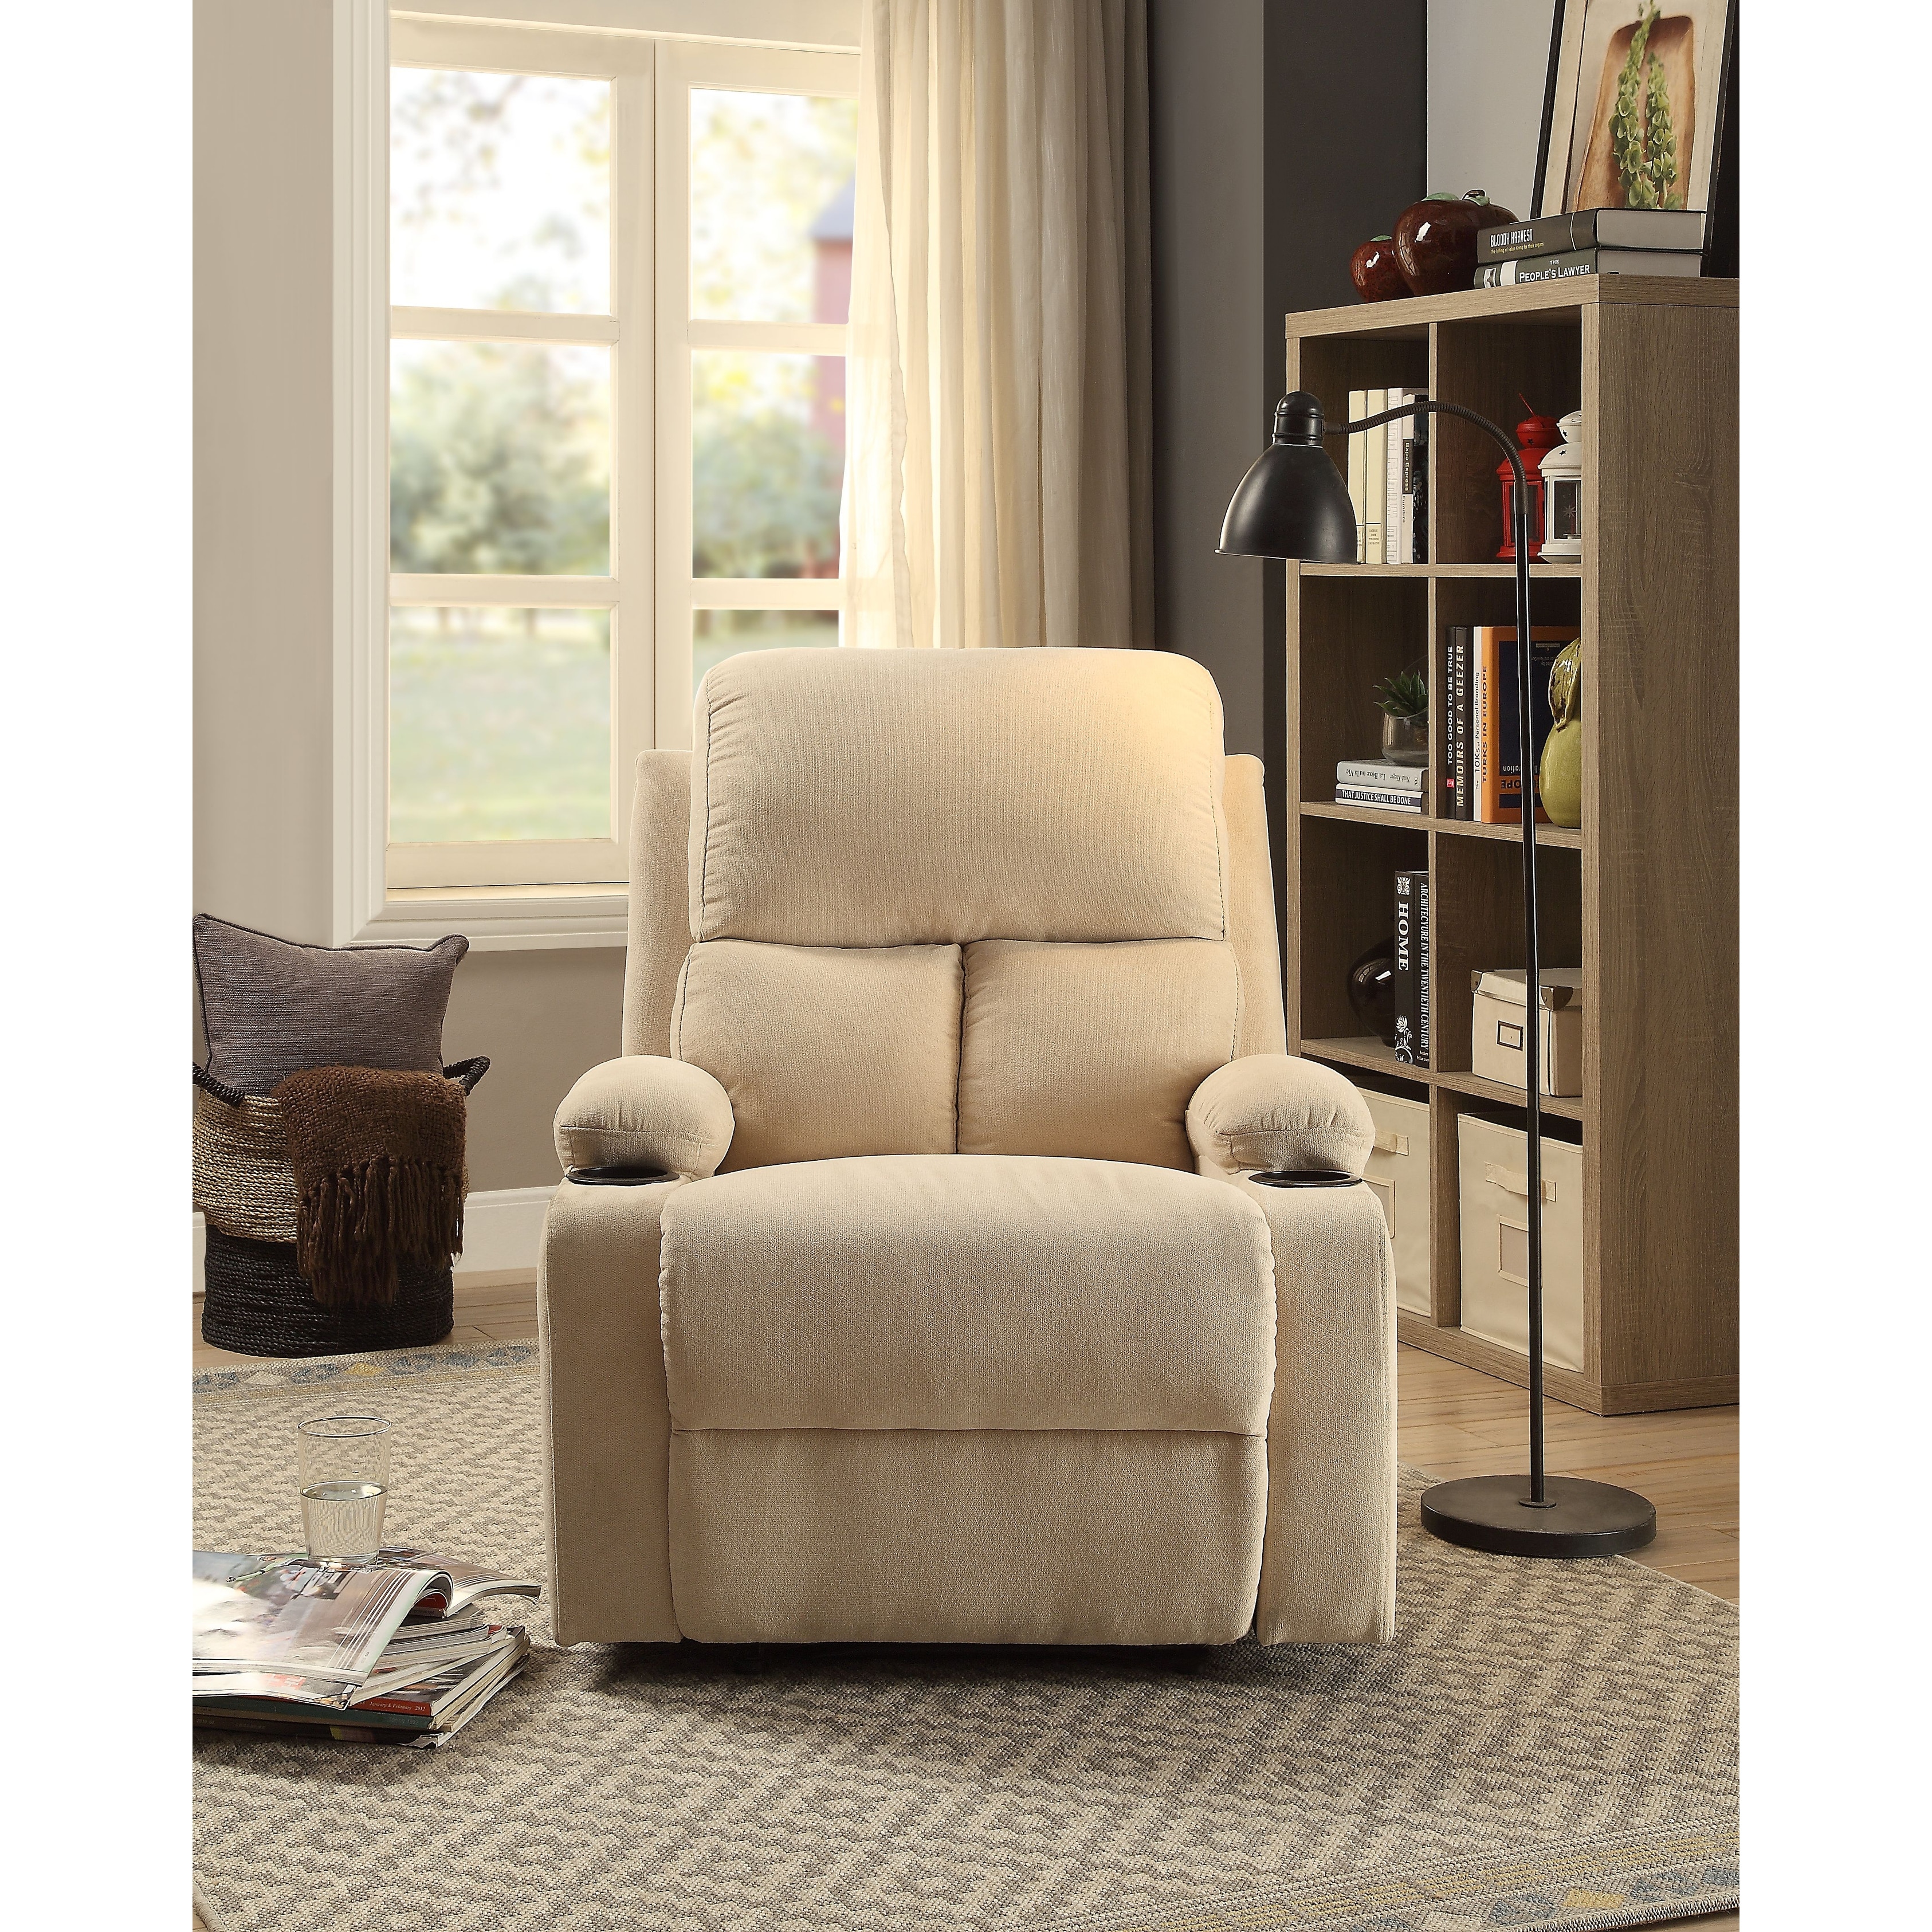 https://ak1.ostkcdn.com/images/products/is/images/direct/b6bdddd0aa752452faae1eefac7c0f6fa6920e69/Beige-Vintage-Motion-Recliner-with-Tight-Back-%26-Seat-Cushions-and-Pillow-Top-Arm-%26-Cup-Holder.jpg